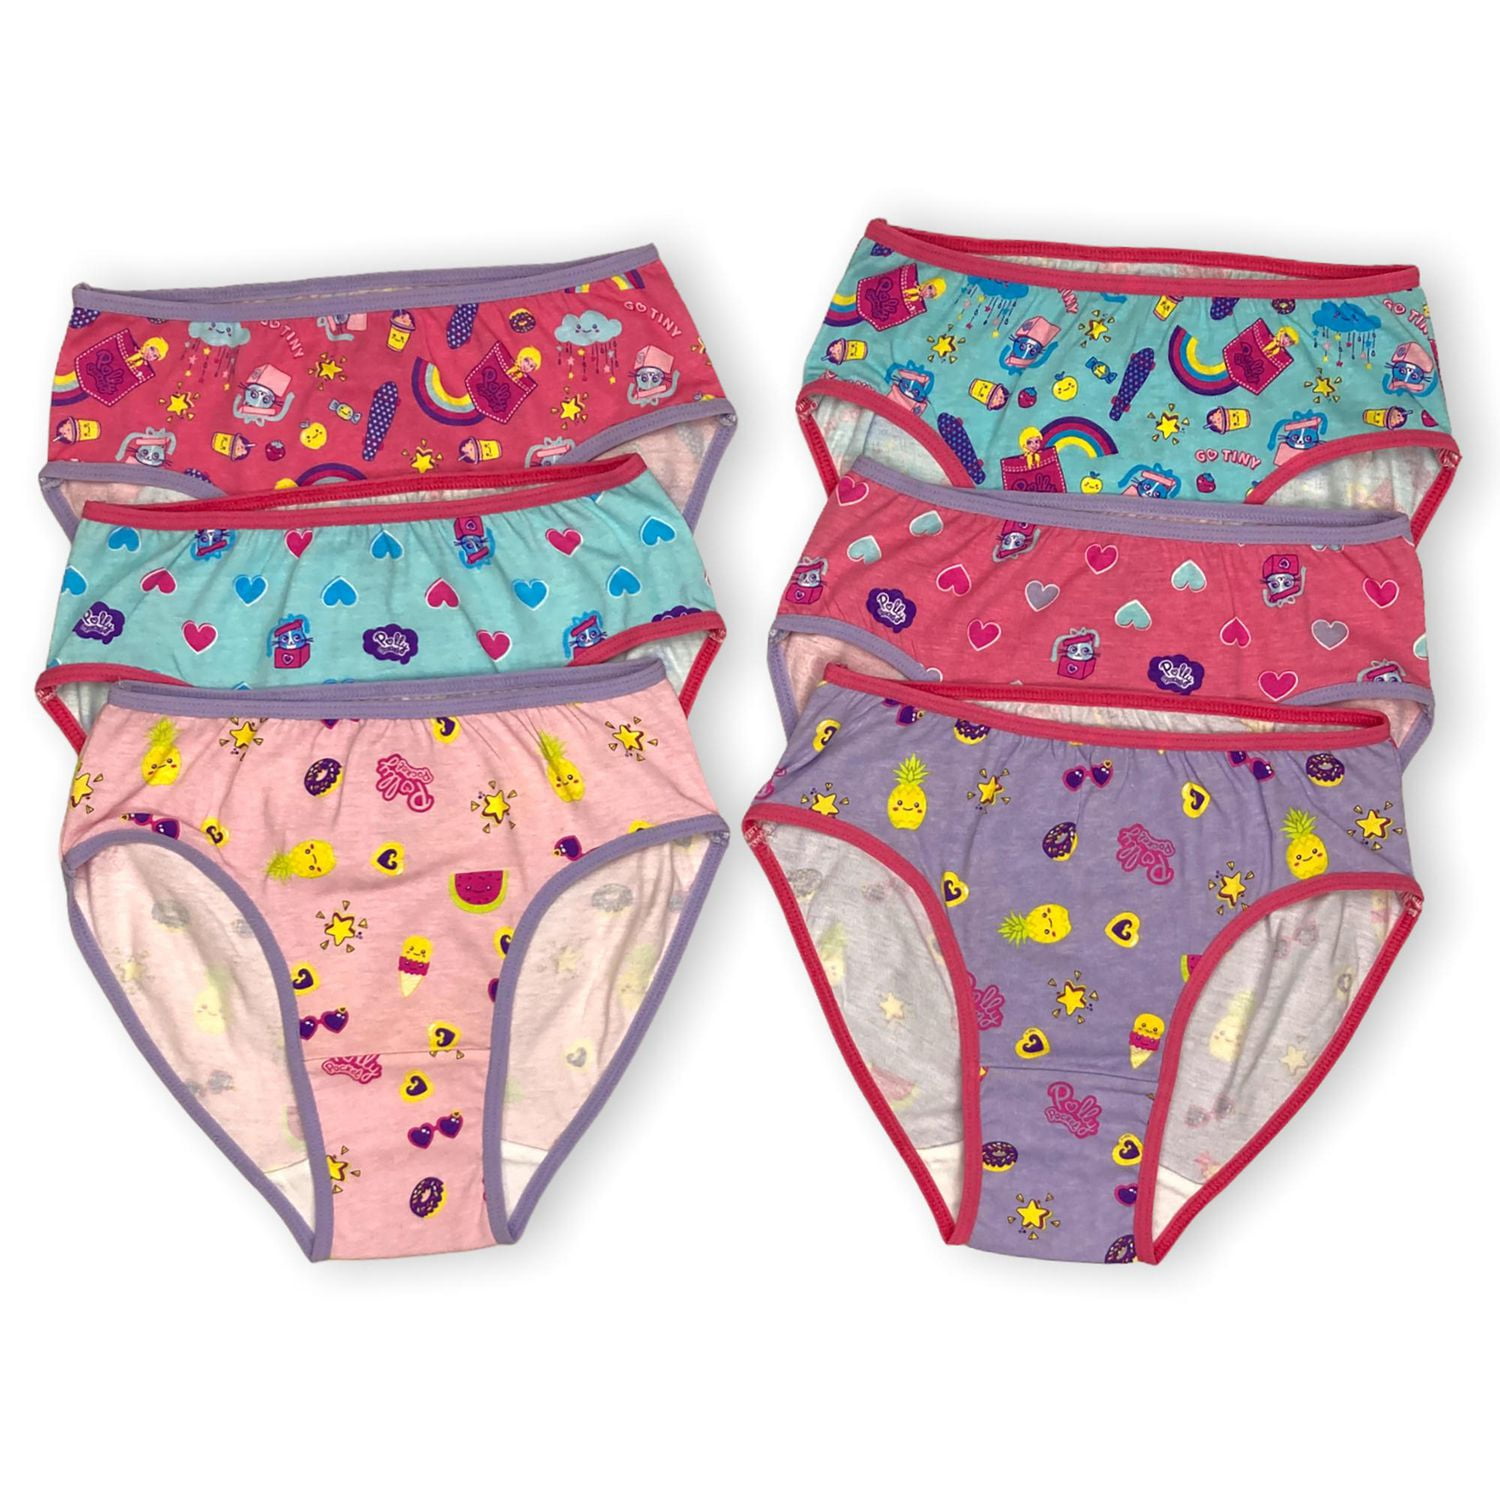 Ark Art 3Pcs/lot Panties for Young Girls Women's Briefs Lace Side